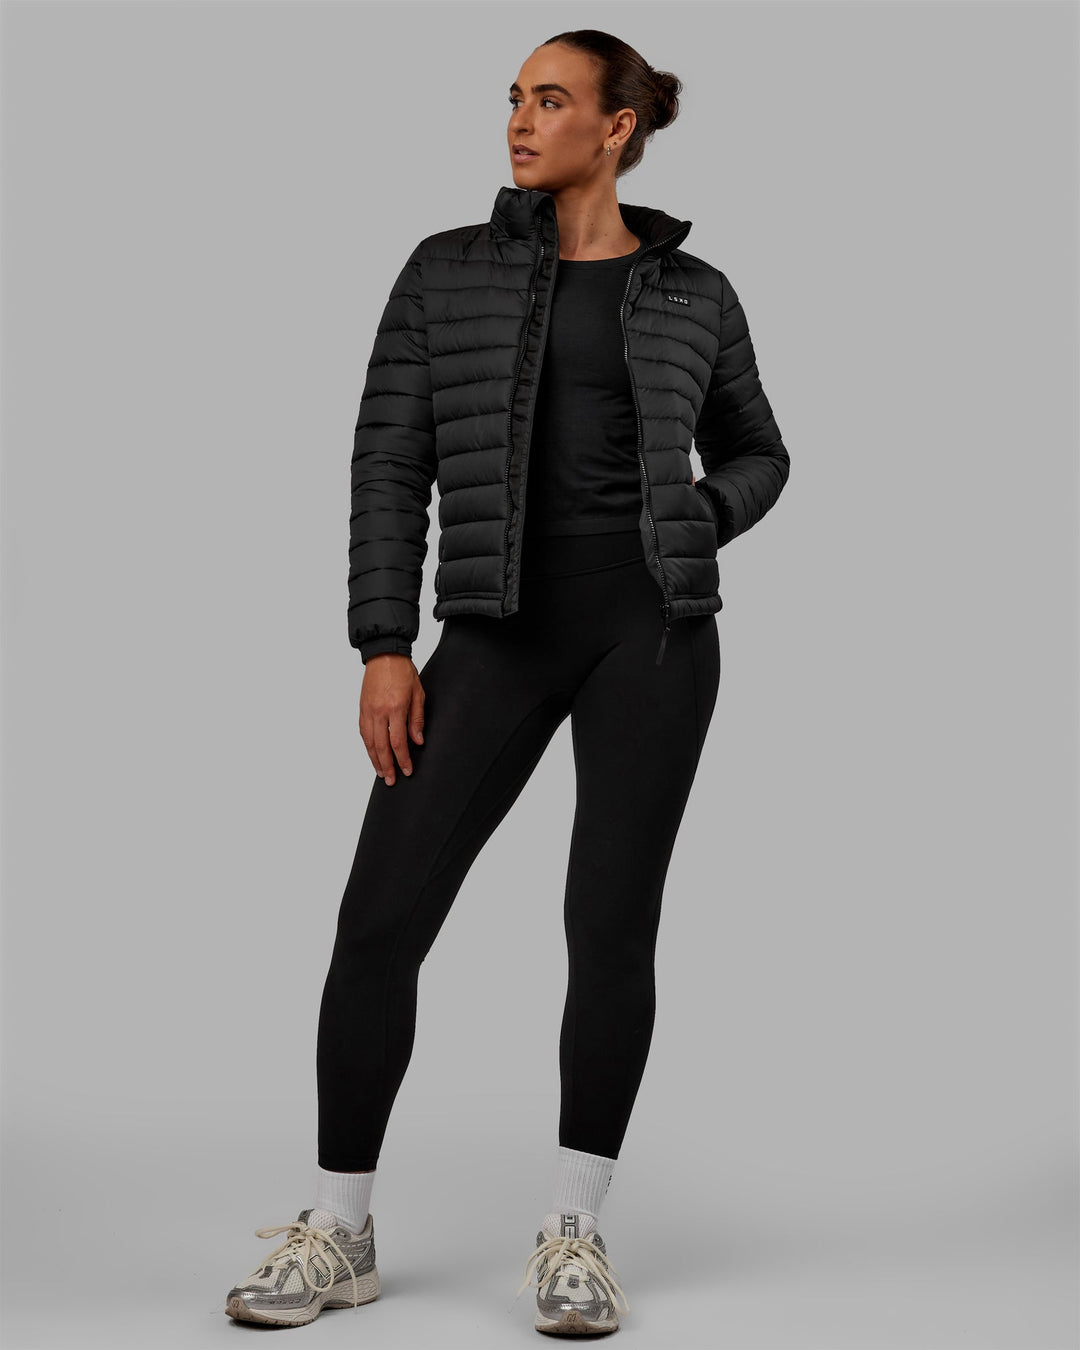 Woman wearing All Day Puffer Jacket - Black